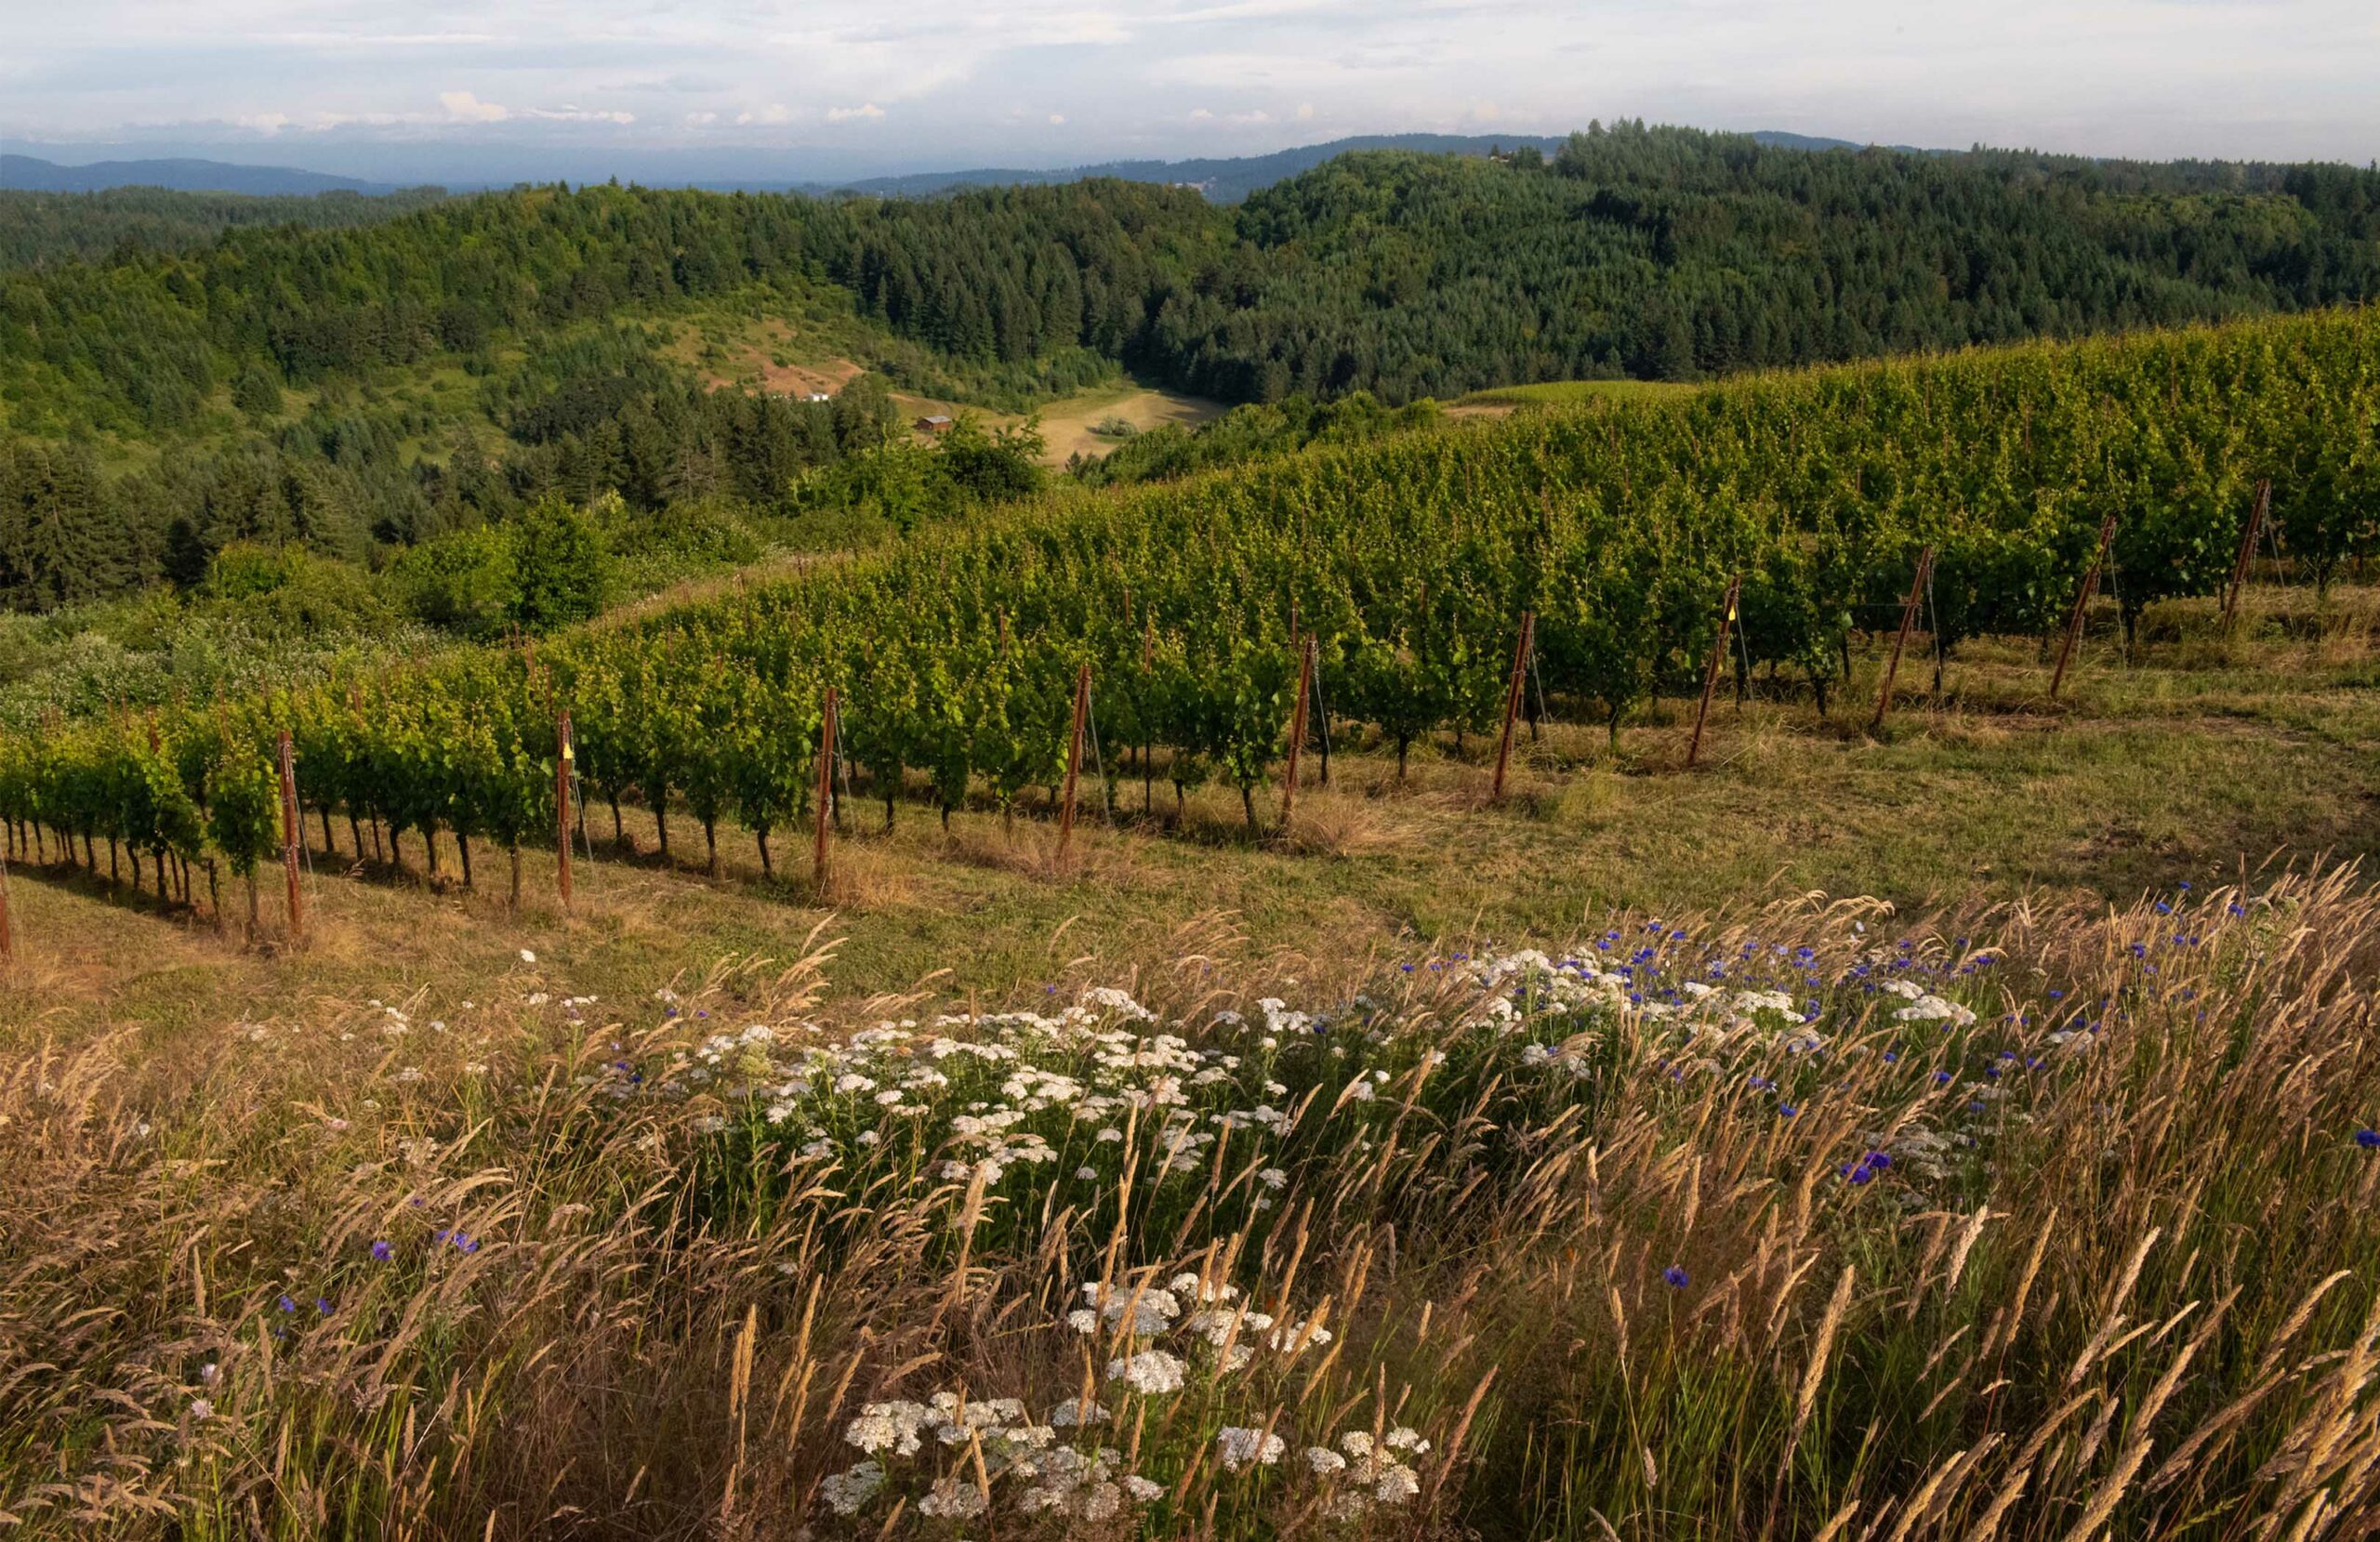 Fairsing Vineyard in Oregon's Willamette Valley surrounded by forest, oak plantings, and native grasses